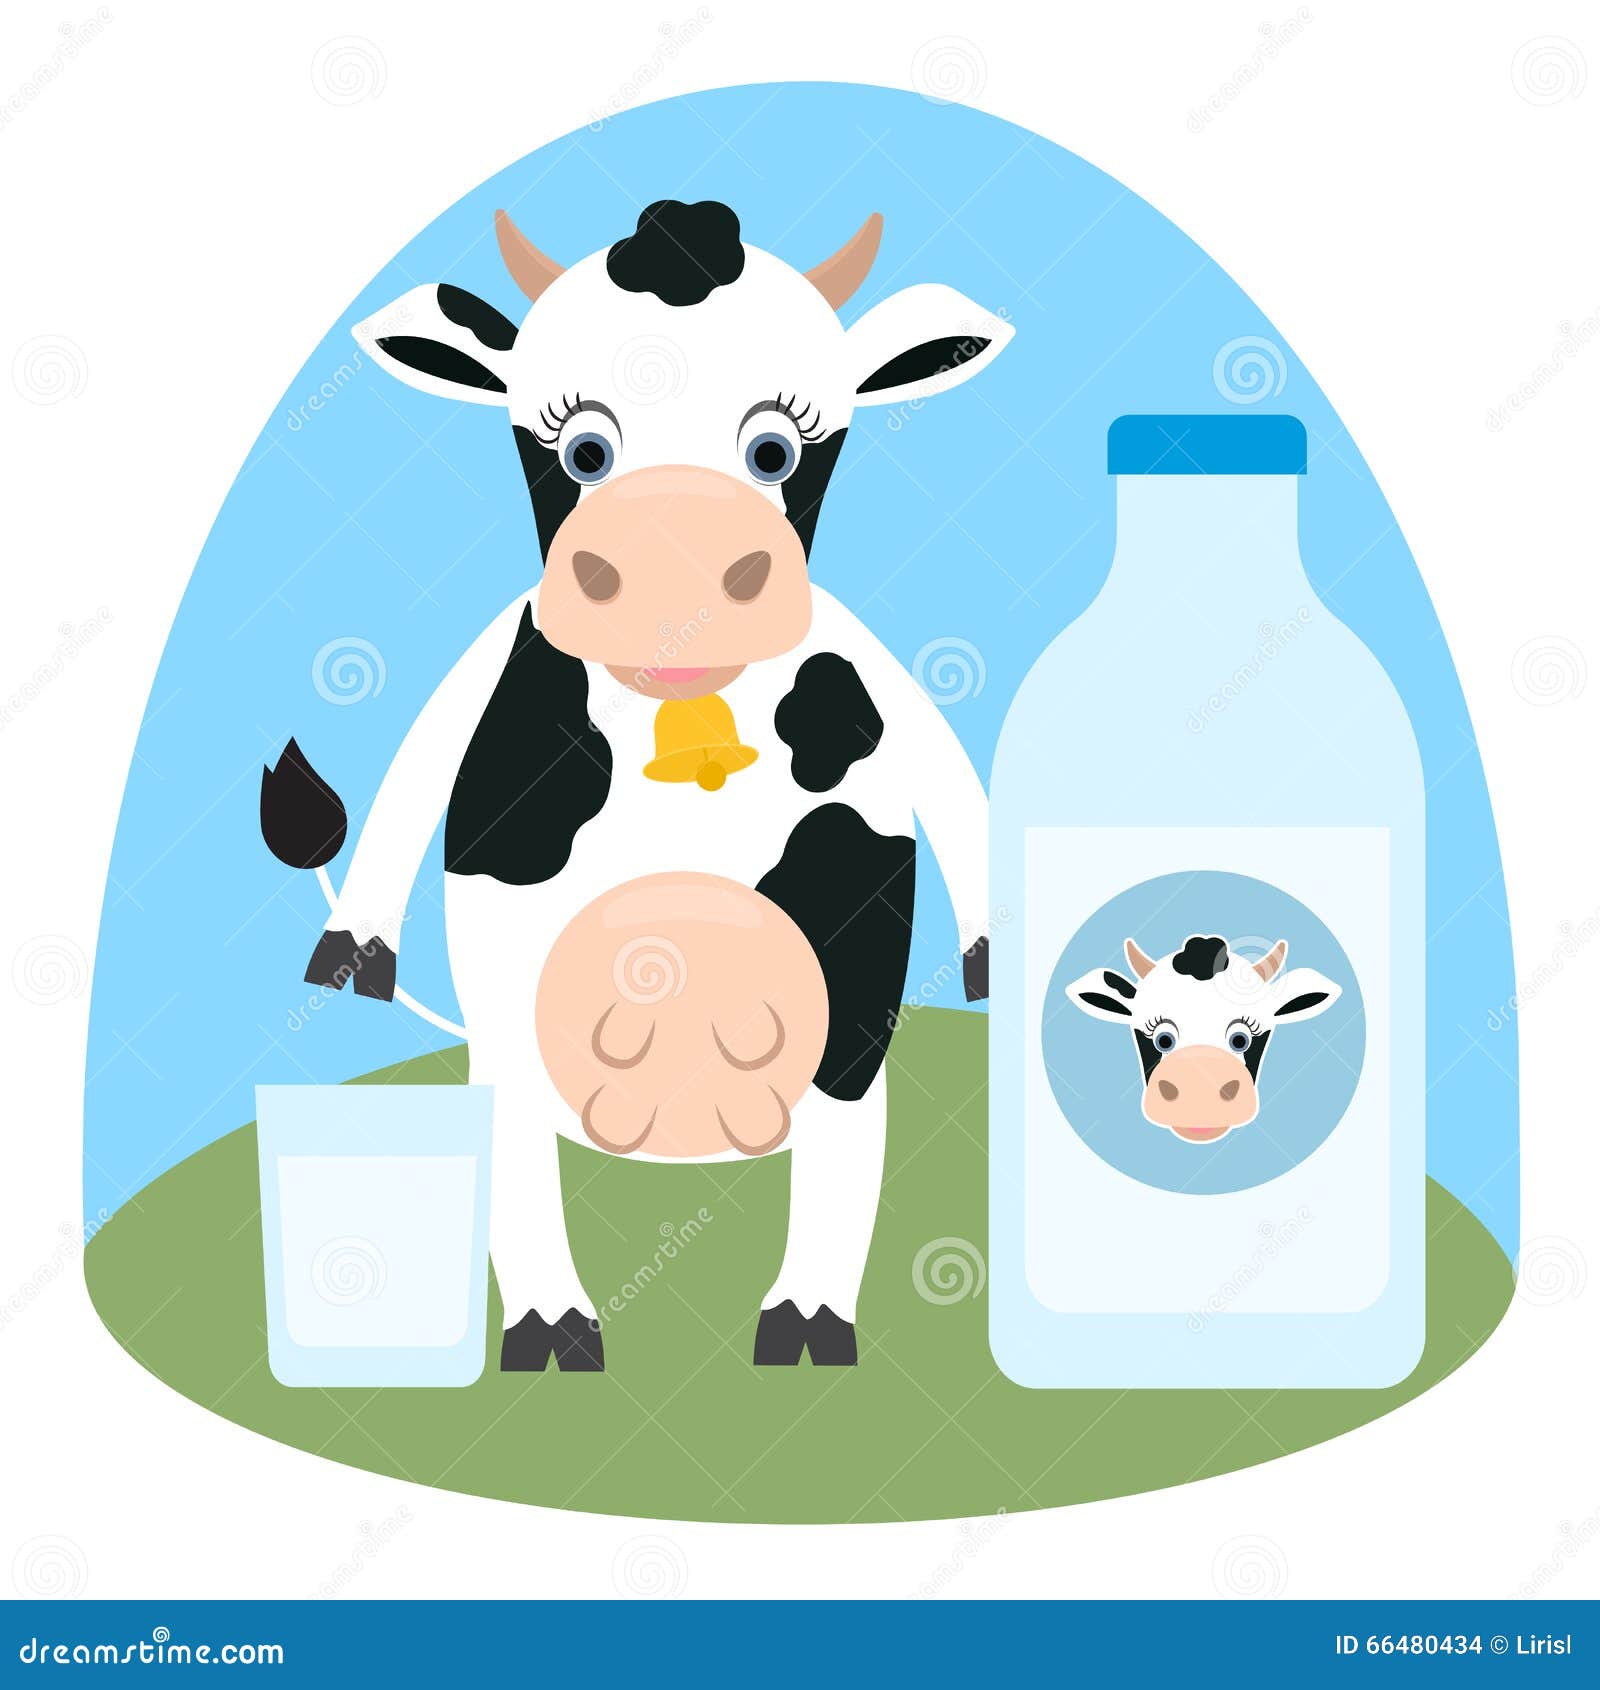 Cute Cartoon Cow With Glass And Milk Bottle And Label On It Illustration  66480434 - Megapixl